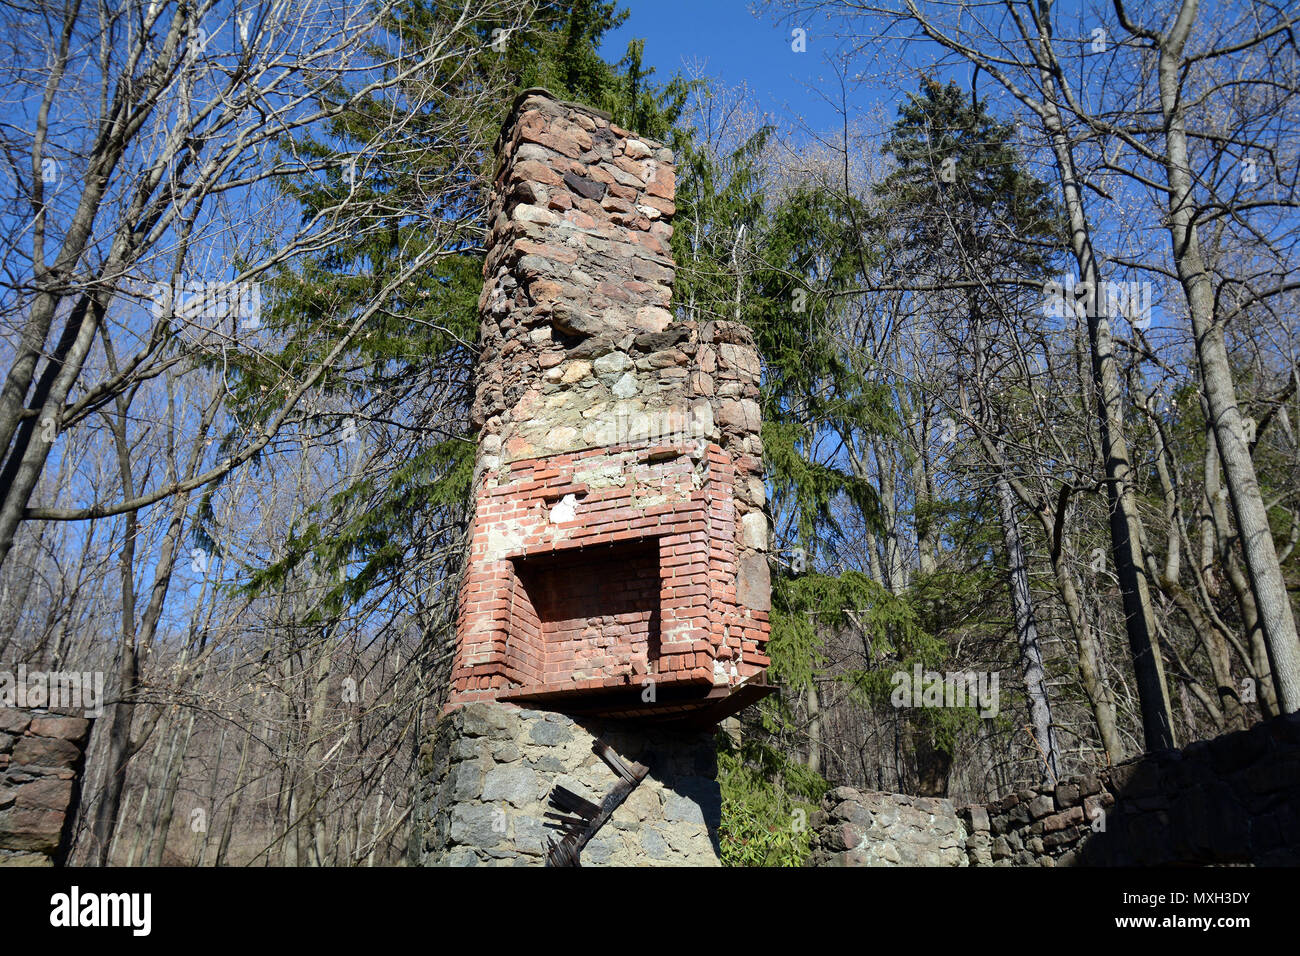 Fireplace and Chimney of Cornish Estate Ruins in the Woods Stock Photo